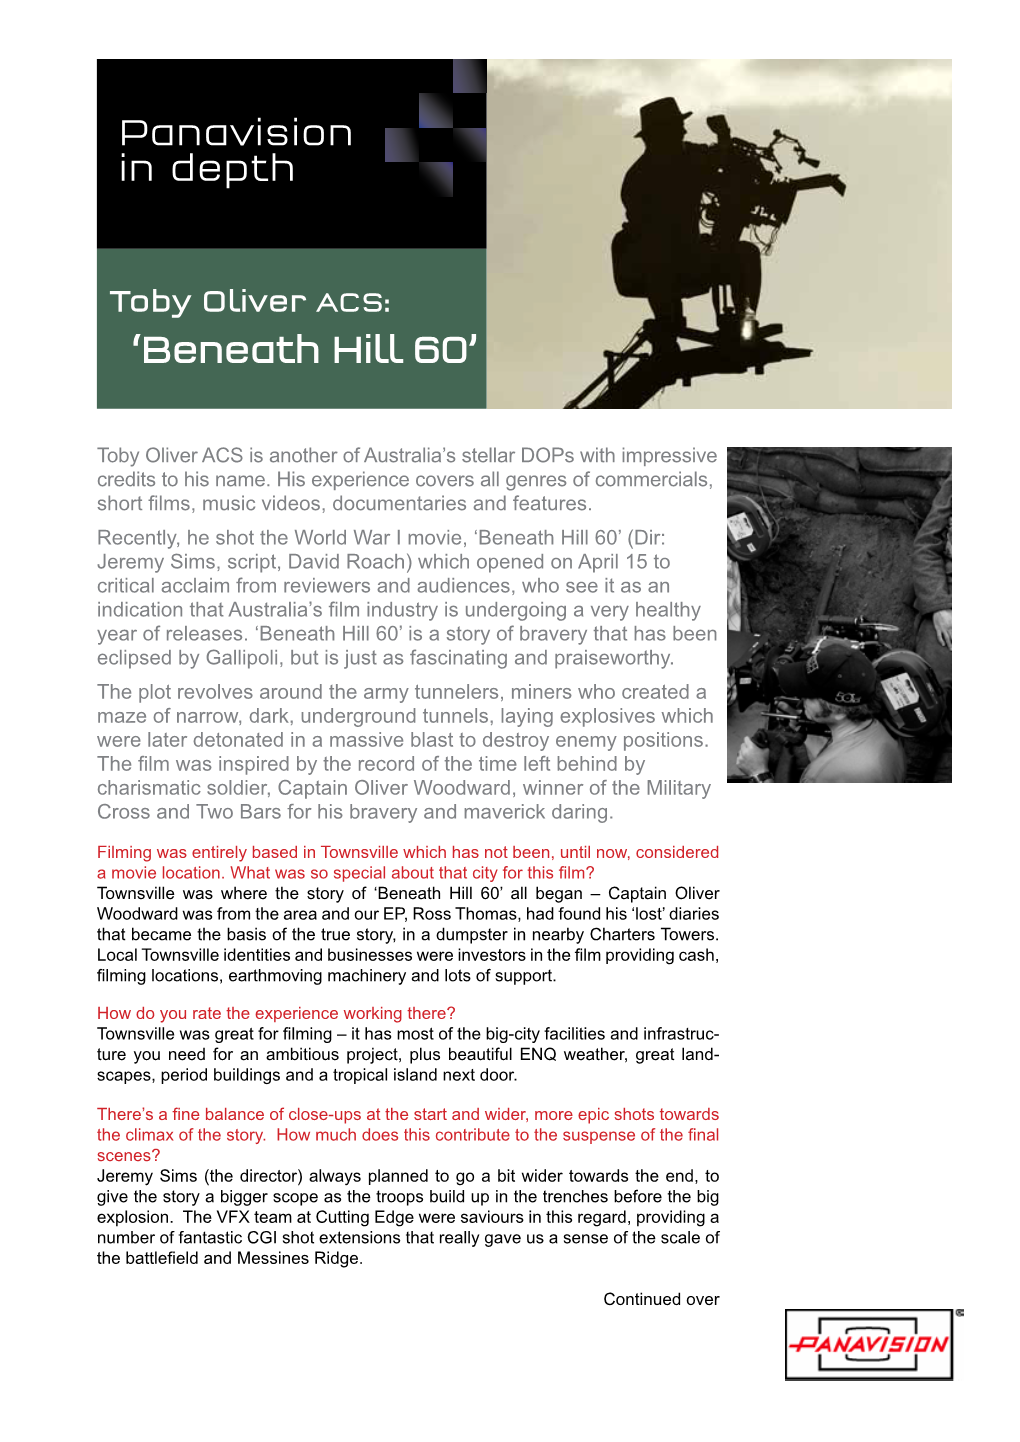 Toby Oliver ACS: ‘Beneath Hill 60’